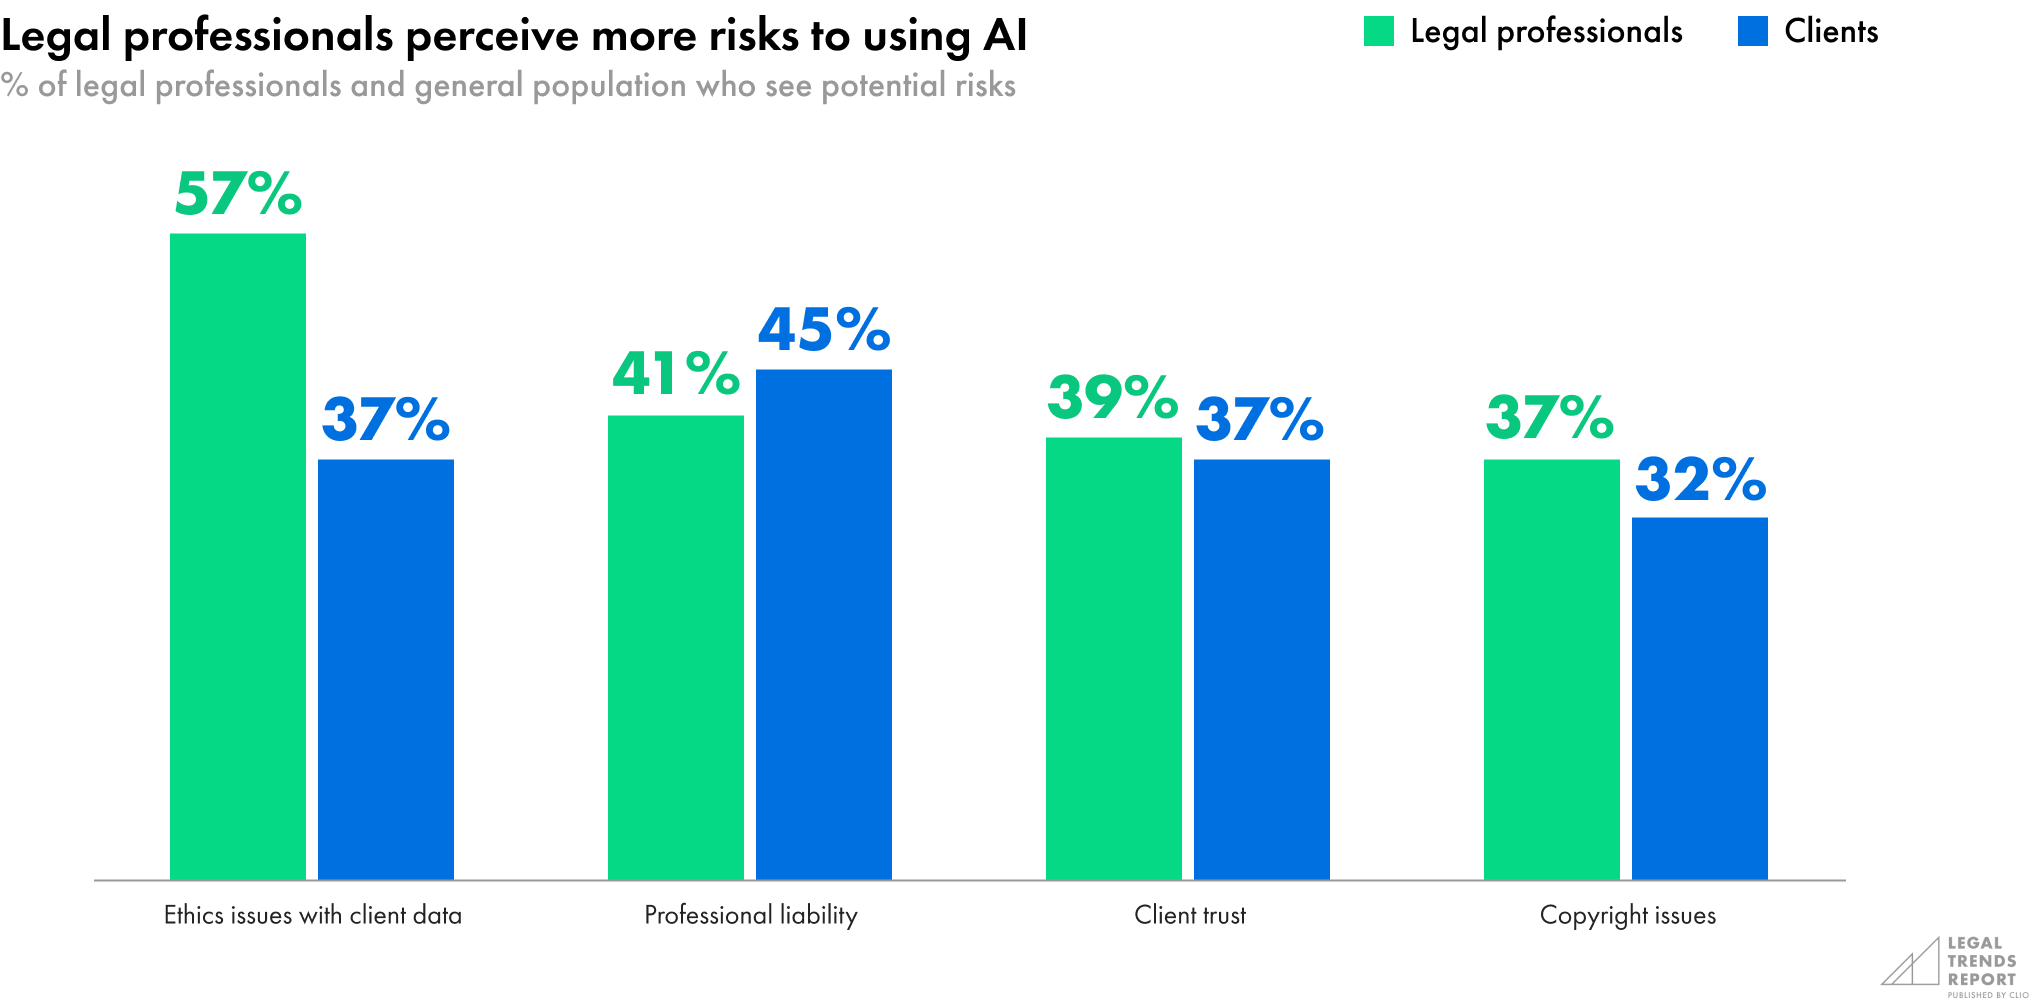 Legal professionals perceive more risks to using AI